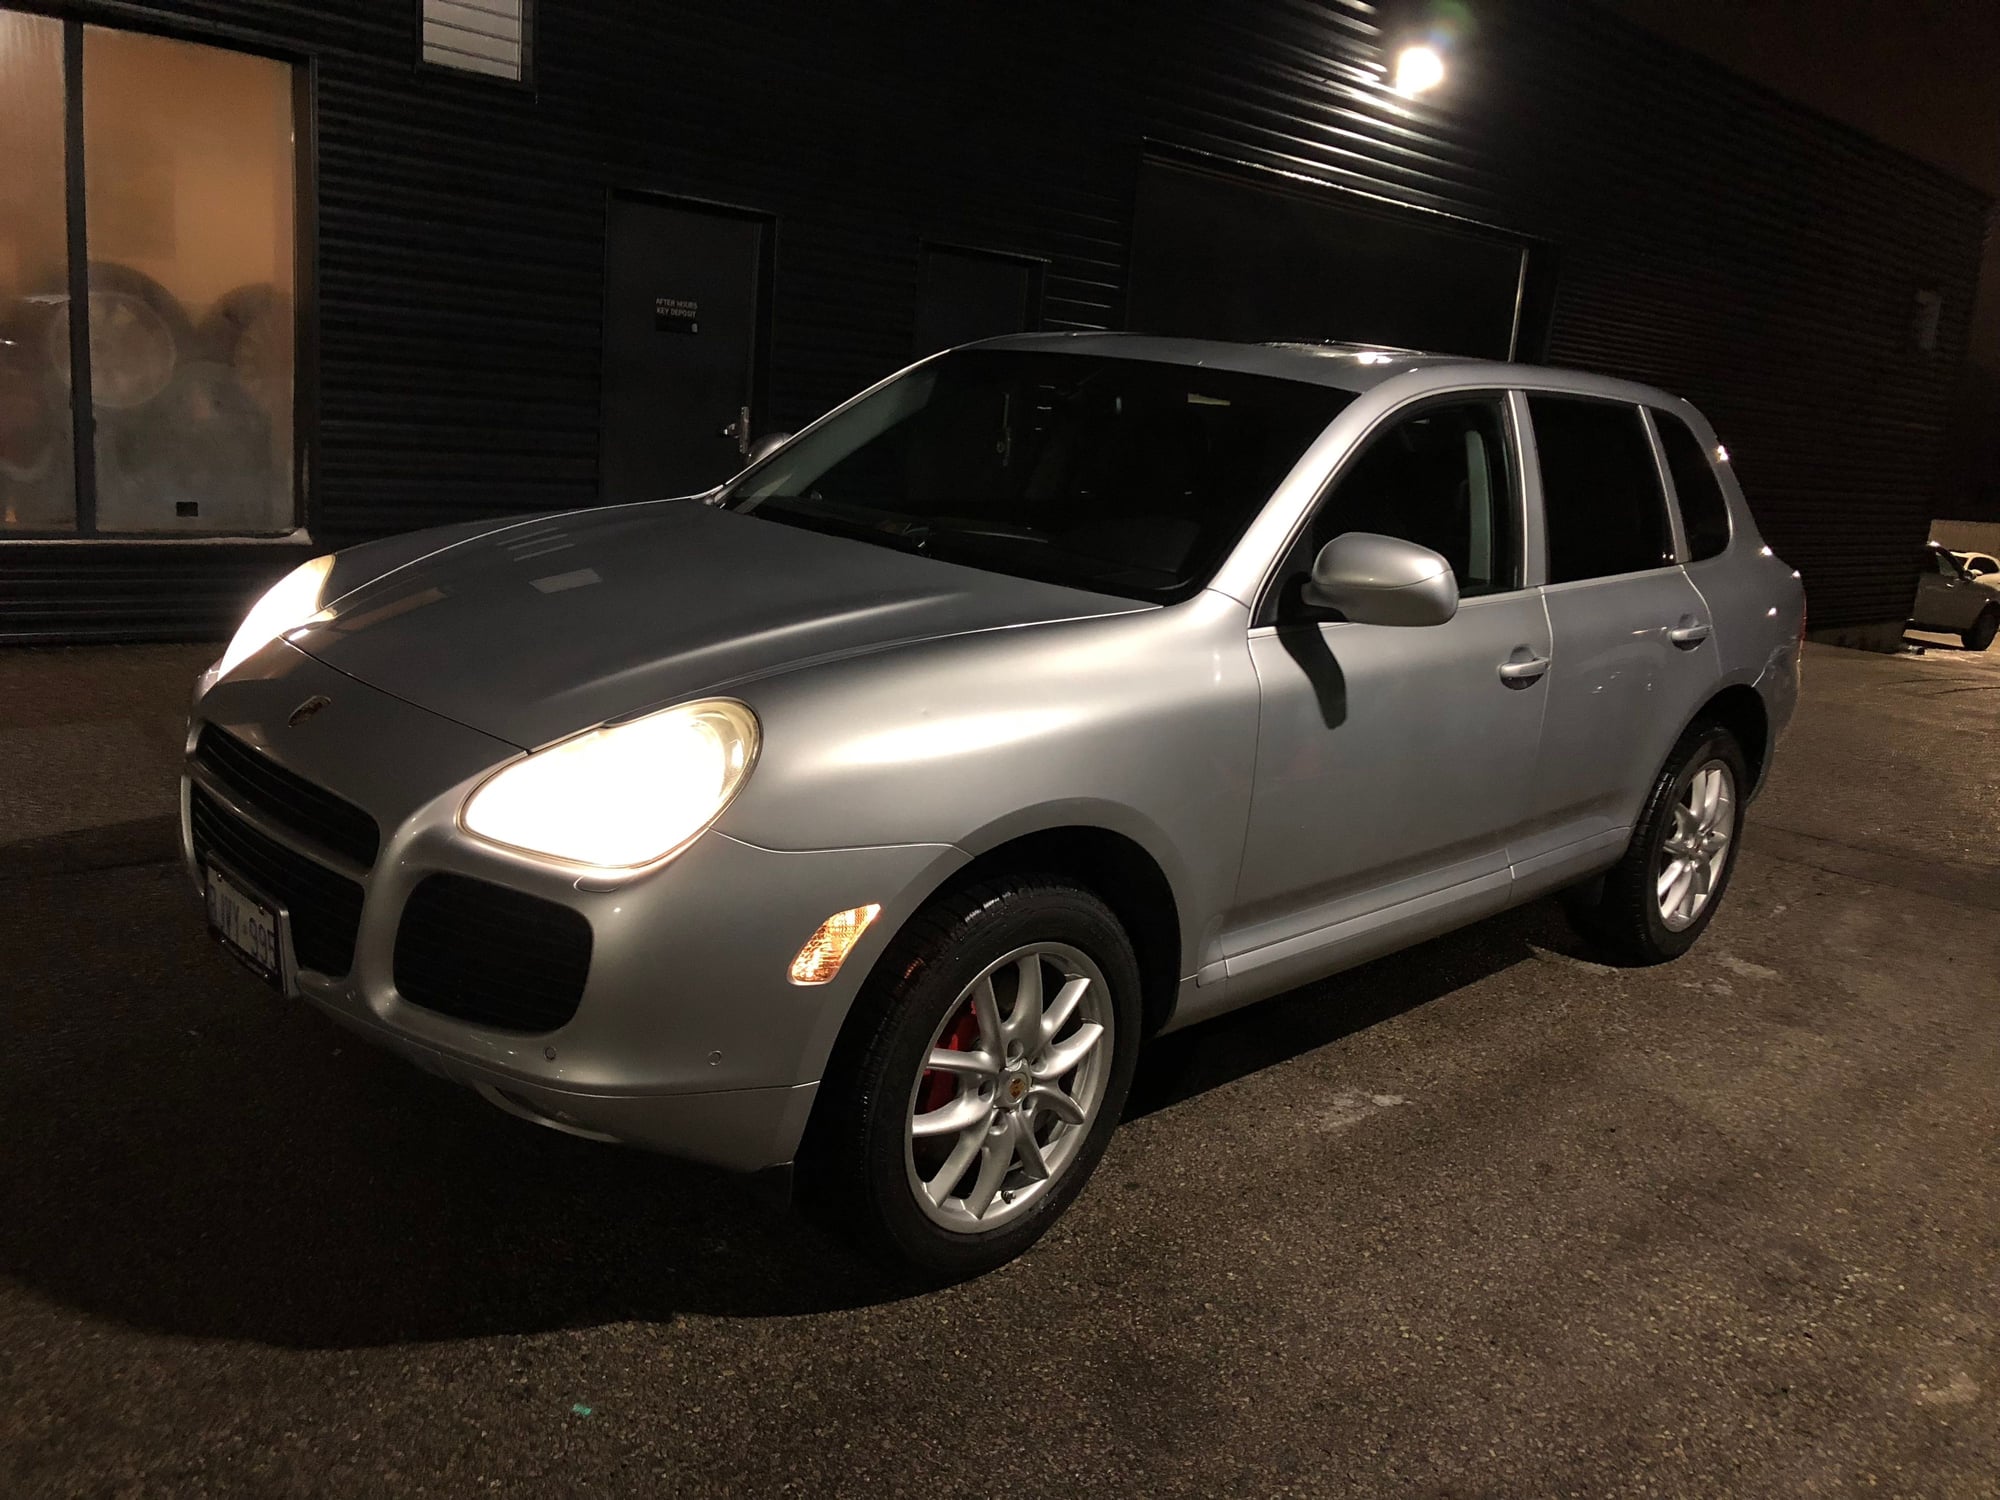 2004 Porsche Cayenne - 2004 Porsche Cayenne Turbo - Prev. Owned by Jerry Seinfeld - Used - VIN WP1AC29PX4LA90834 - 74,800 Miles - 8 cyl - AWD - Automatic - SUV - Silver - London, ON N6K4J5, Canada